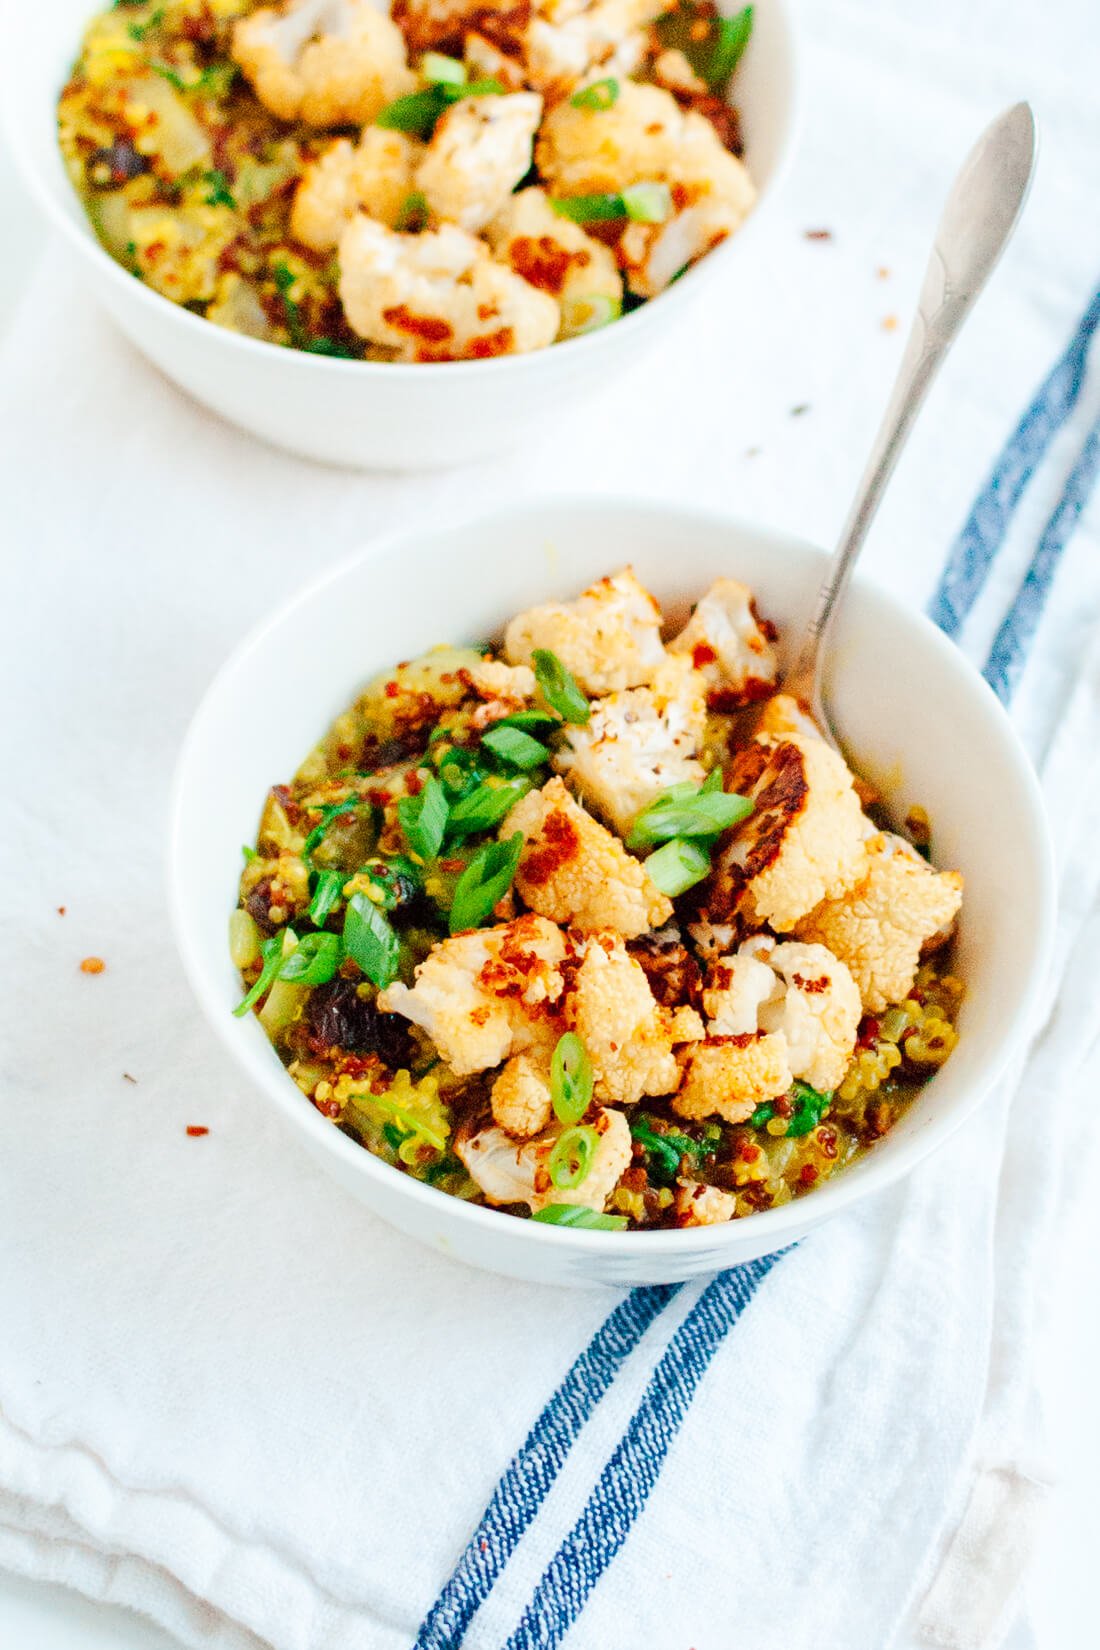 Curried Coconut Quinoa and Greens with Roasted Cauliflower Recipe - cookieandkate.com